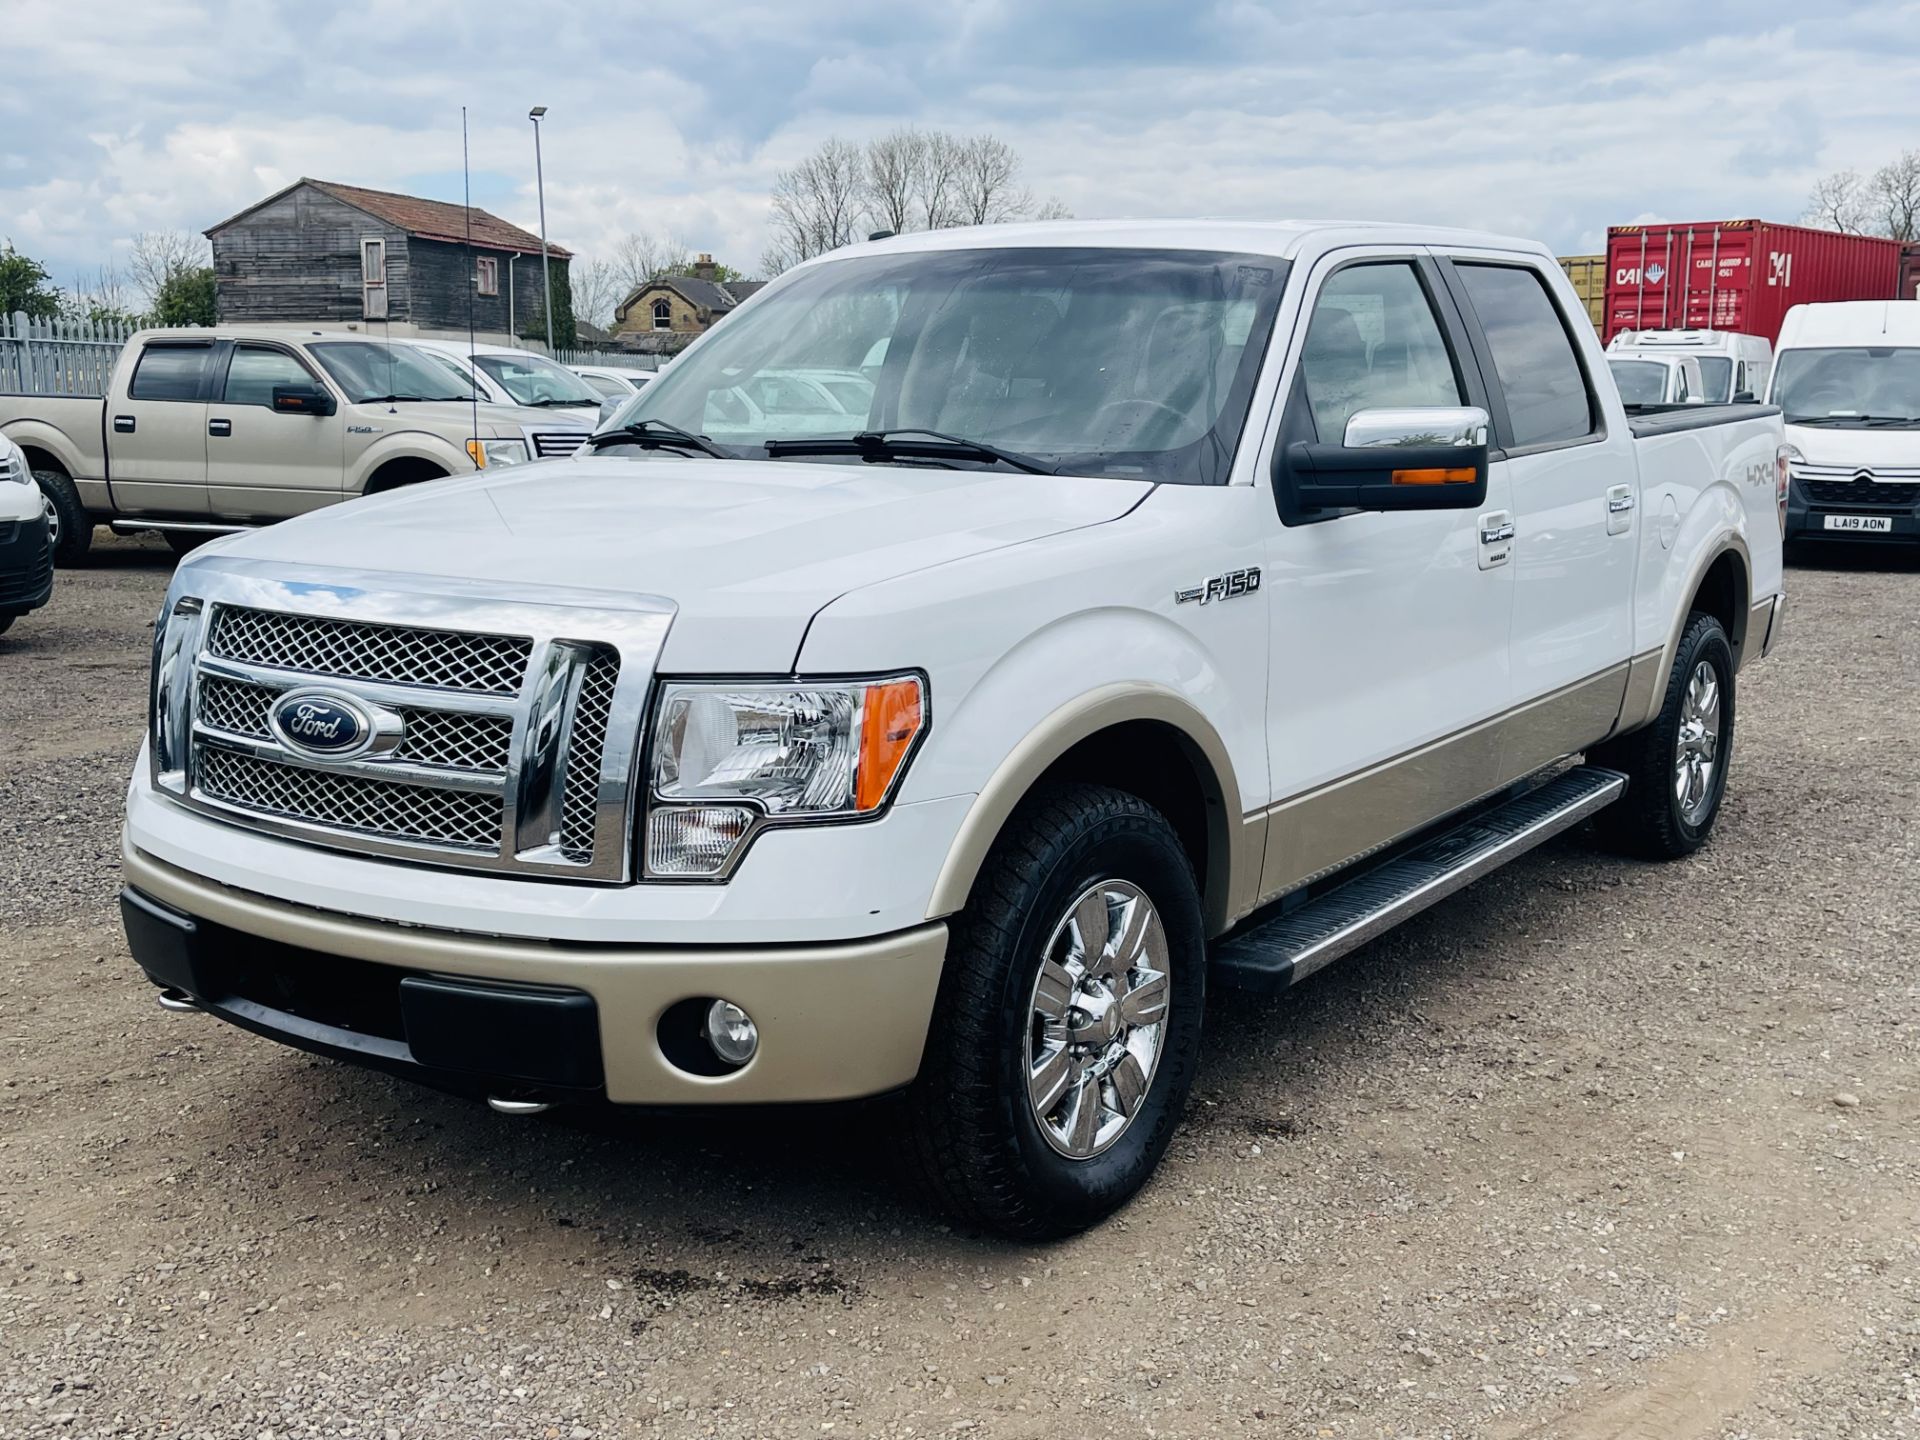 ** ON SALE ** Ford F-150 5.4L V8 Lariat Supercrew 4WD ' 2010 Year' A/C - Full Spec - ULEZ Compliant - Image 4 of 29